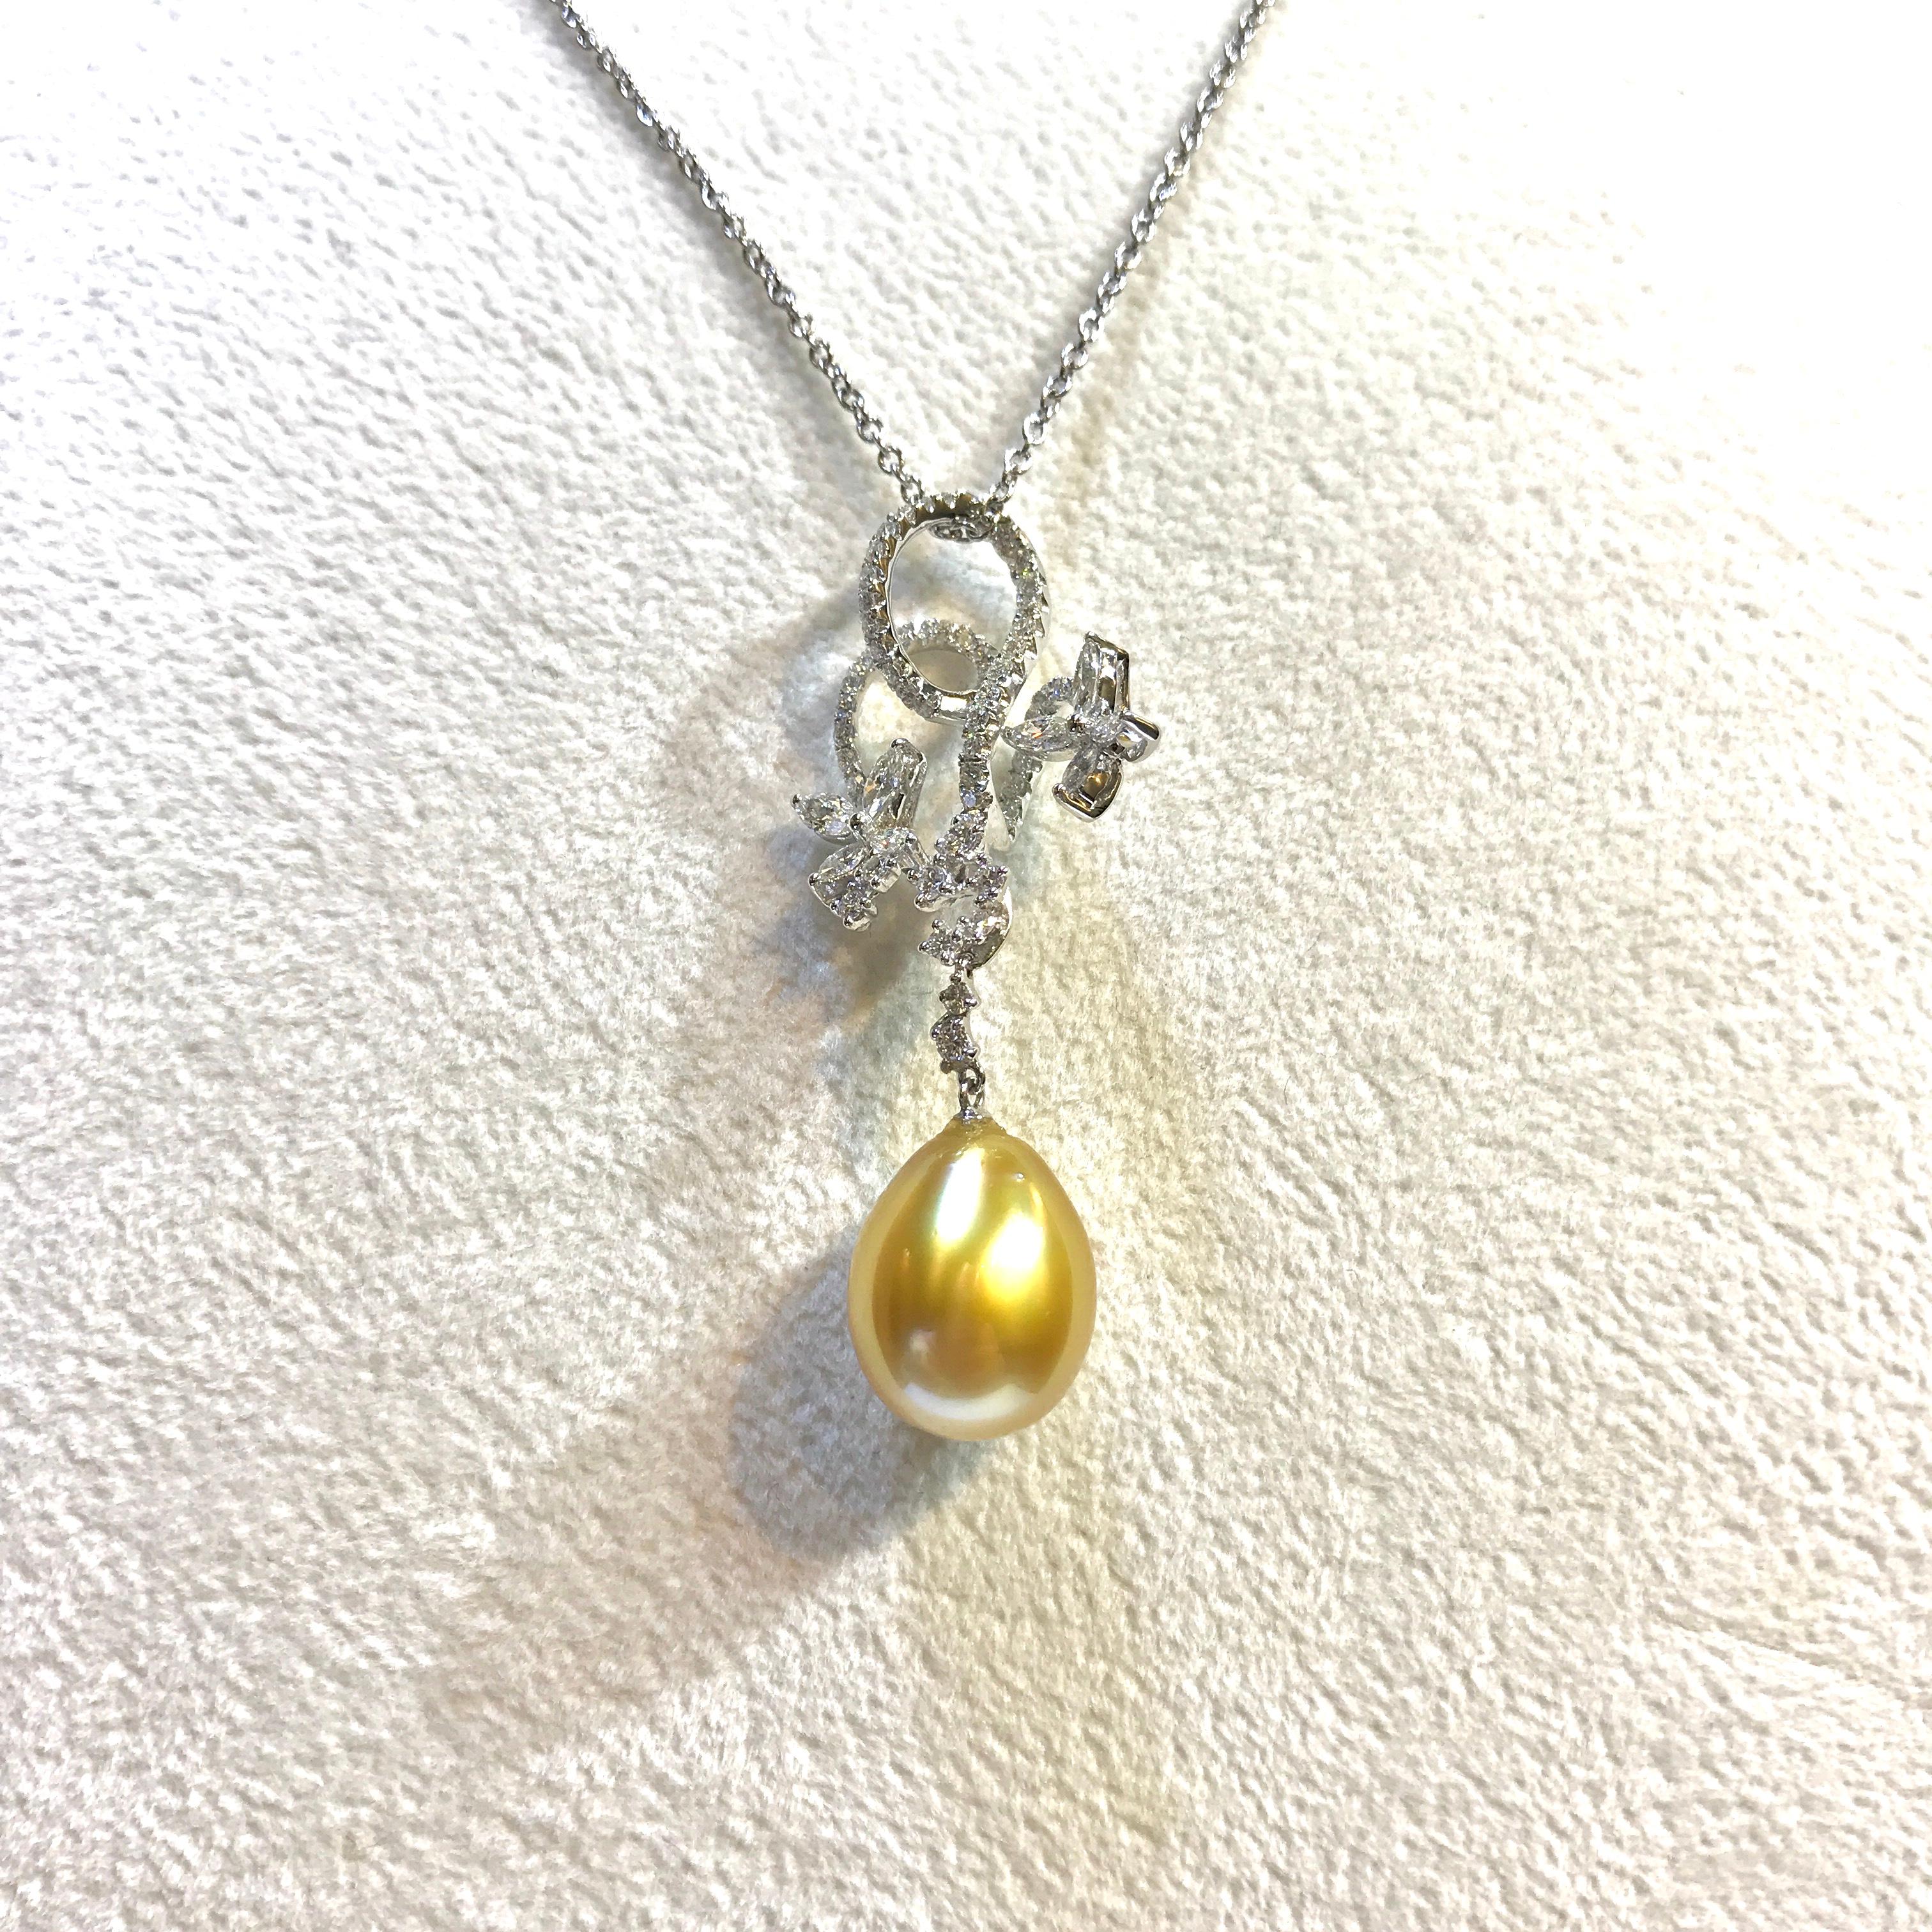 Elegant Golden drop South sea pearl diamond pendant whit 18kw, some marquise flower on the top of pendant , dancing like beautiful butterflies.

Height: 58.72 mm / Width: 14.52 mm / Depth: 5 mm
South Sea Pearl Size: W-12.1 mm x H-14.7 mm
Total